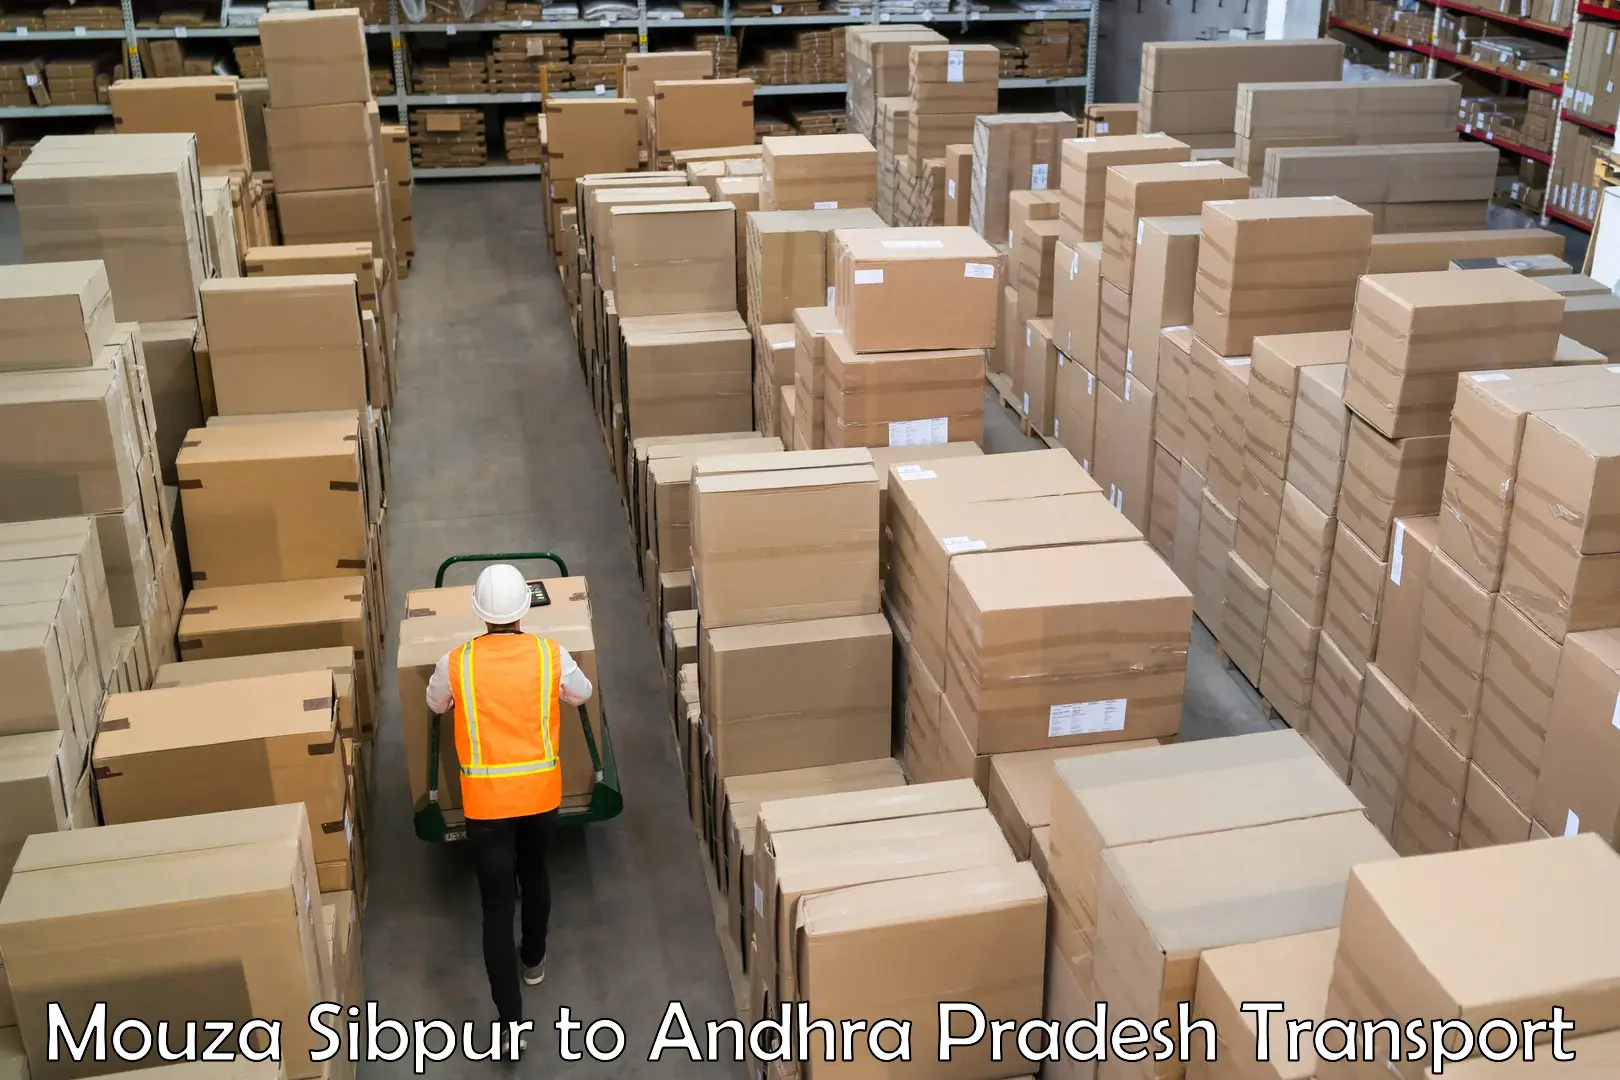 Truck transport companies in India Mouza Sibpur to Sirvella